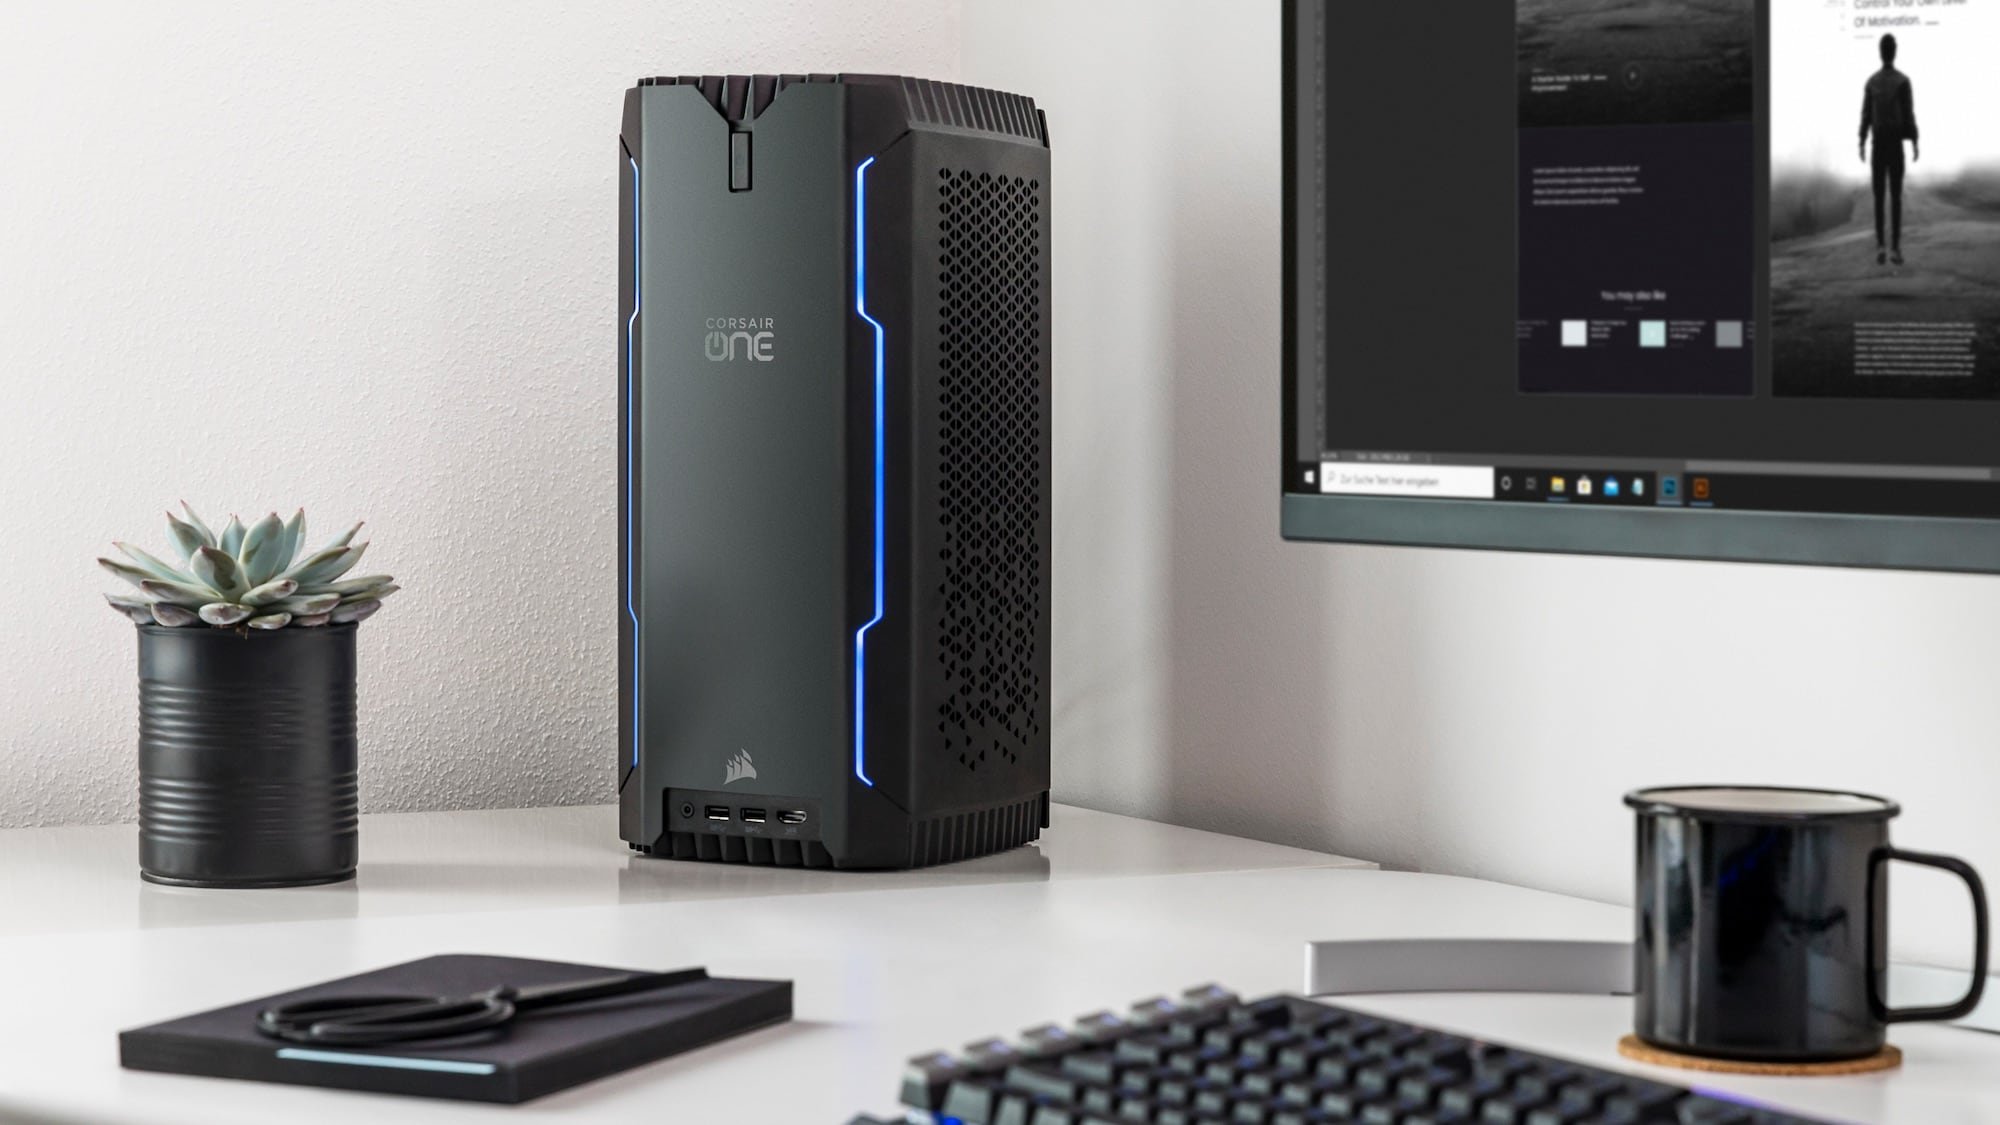 CORSAIR ONE a100 compact gaming PC delivers high performance from a small package